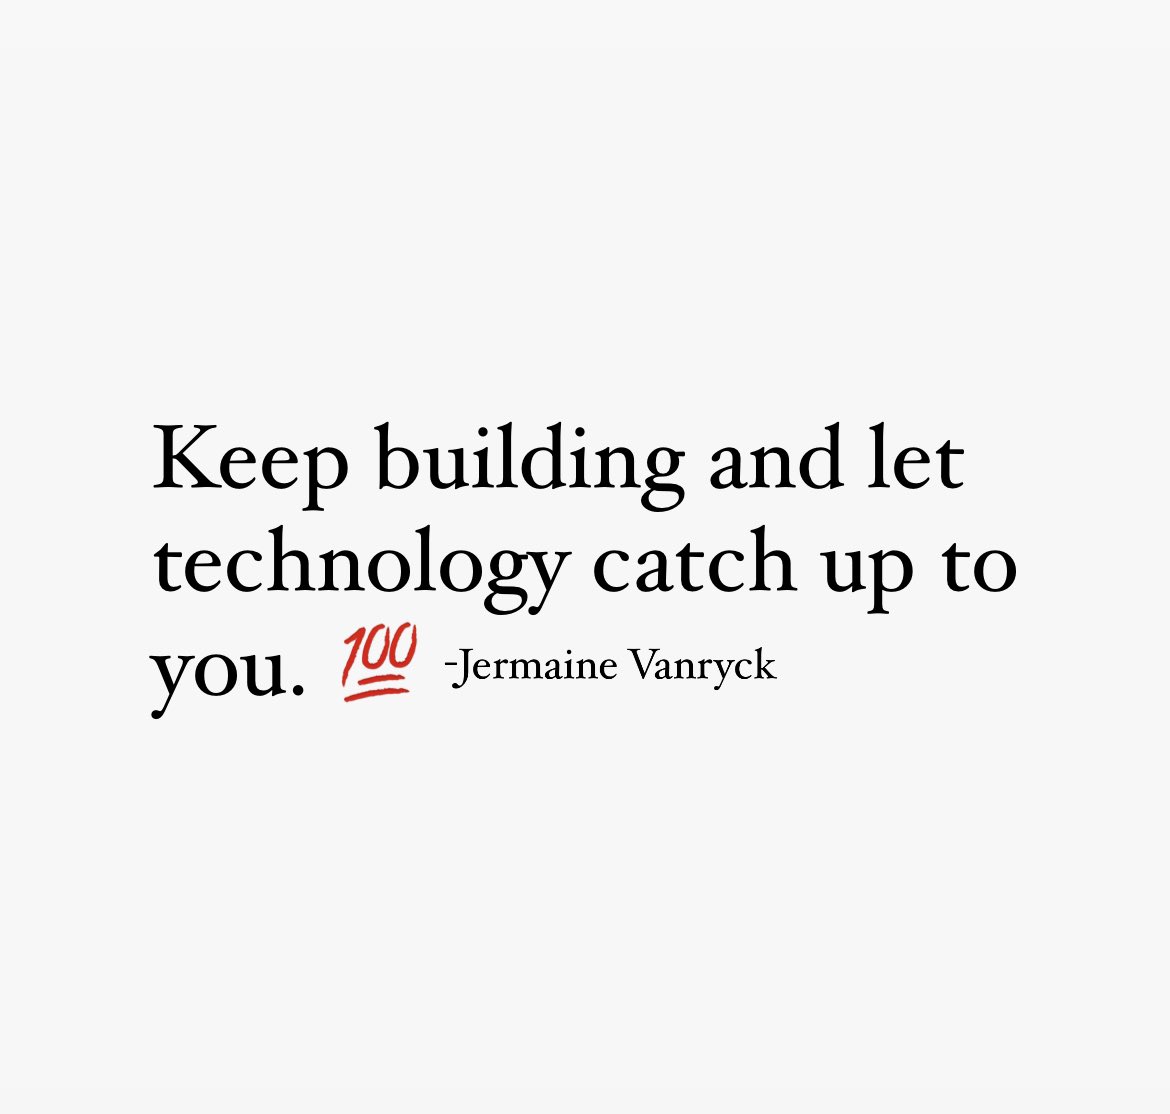 Keep building and let technology catch up to you!! These are words I live by!! Please #like #RETWEEET 
#entrepreneur #entrepreneurmindset #entrepreneurs #enterpreneur #businesslife #sucess #entrepreneurgoals #entrepreneurship #entrepreneurlife #success #business